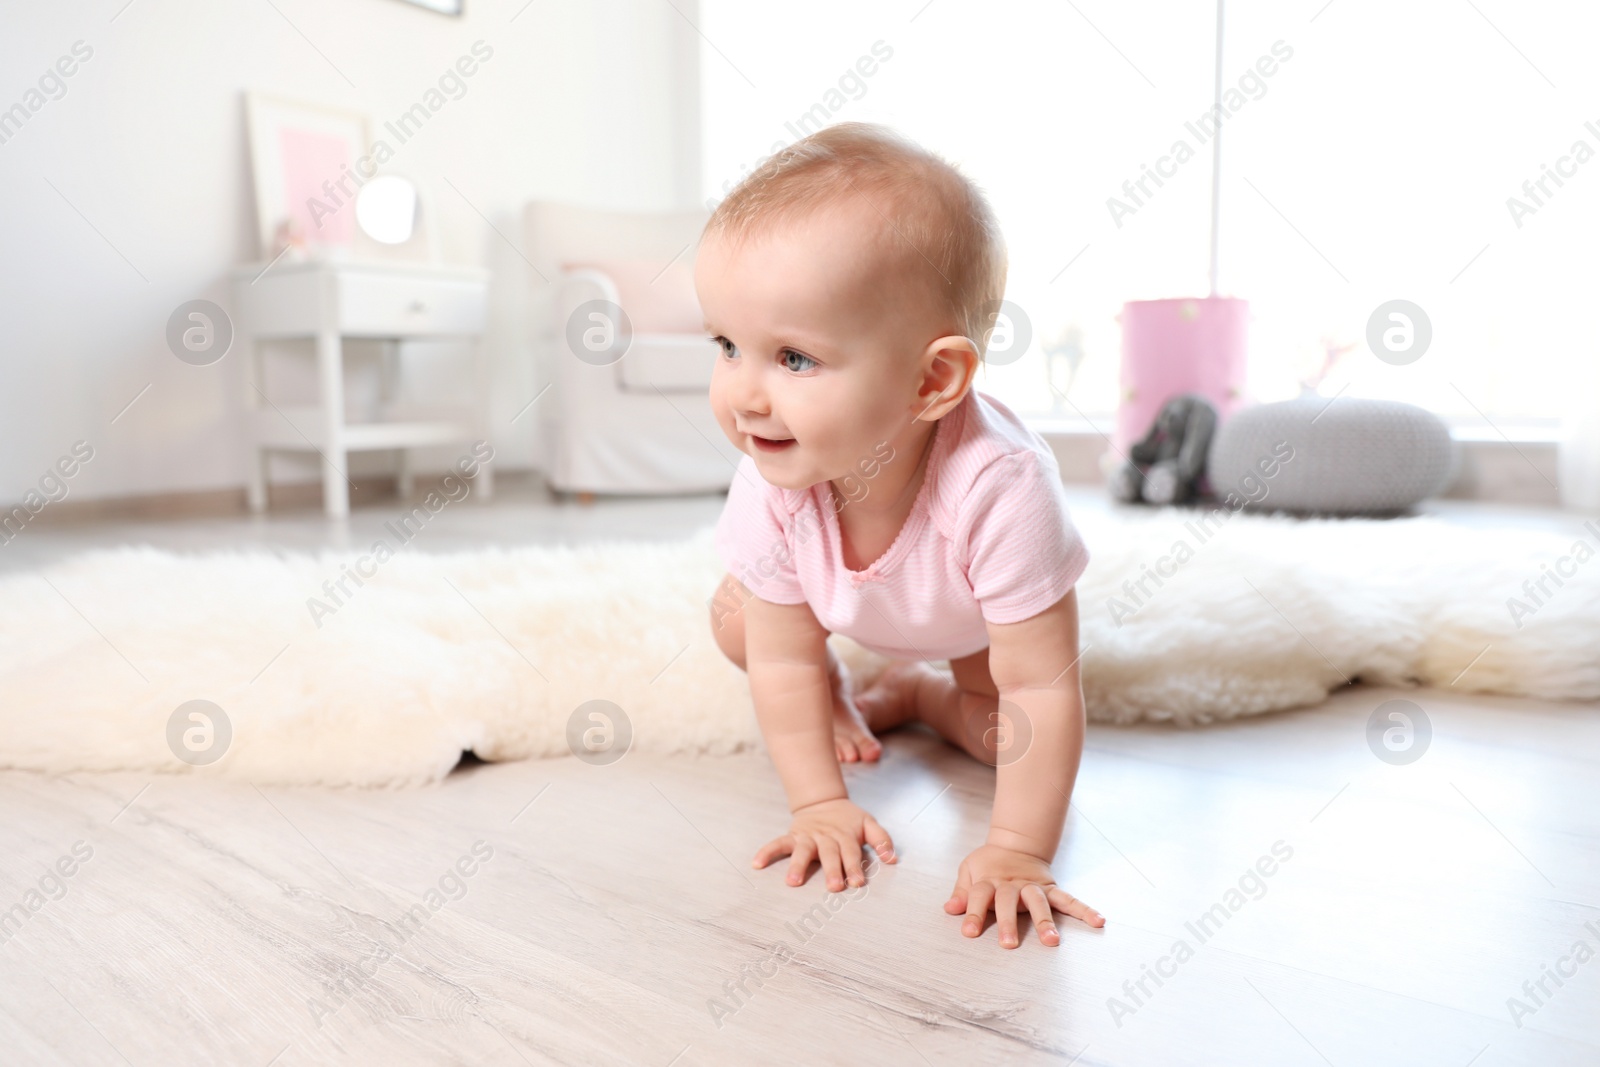 Photo of Cute baby girl crawling on floor in room